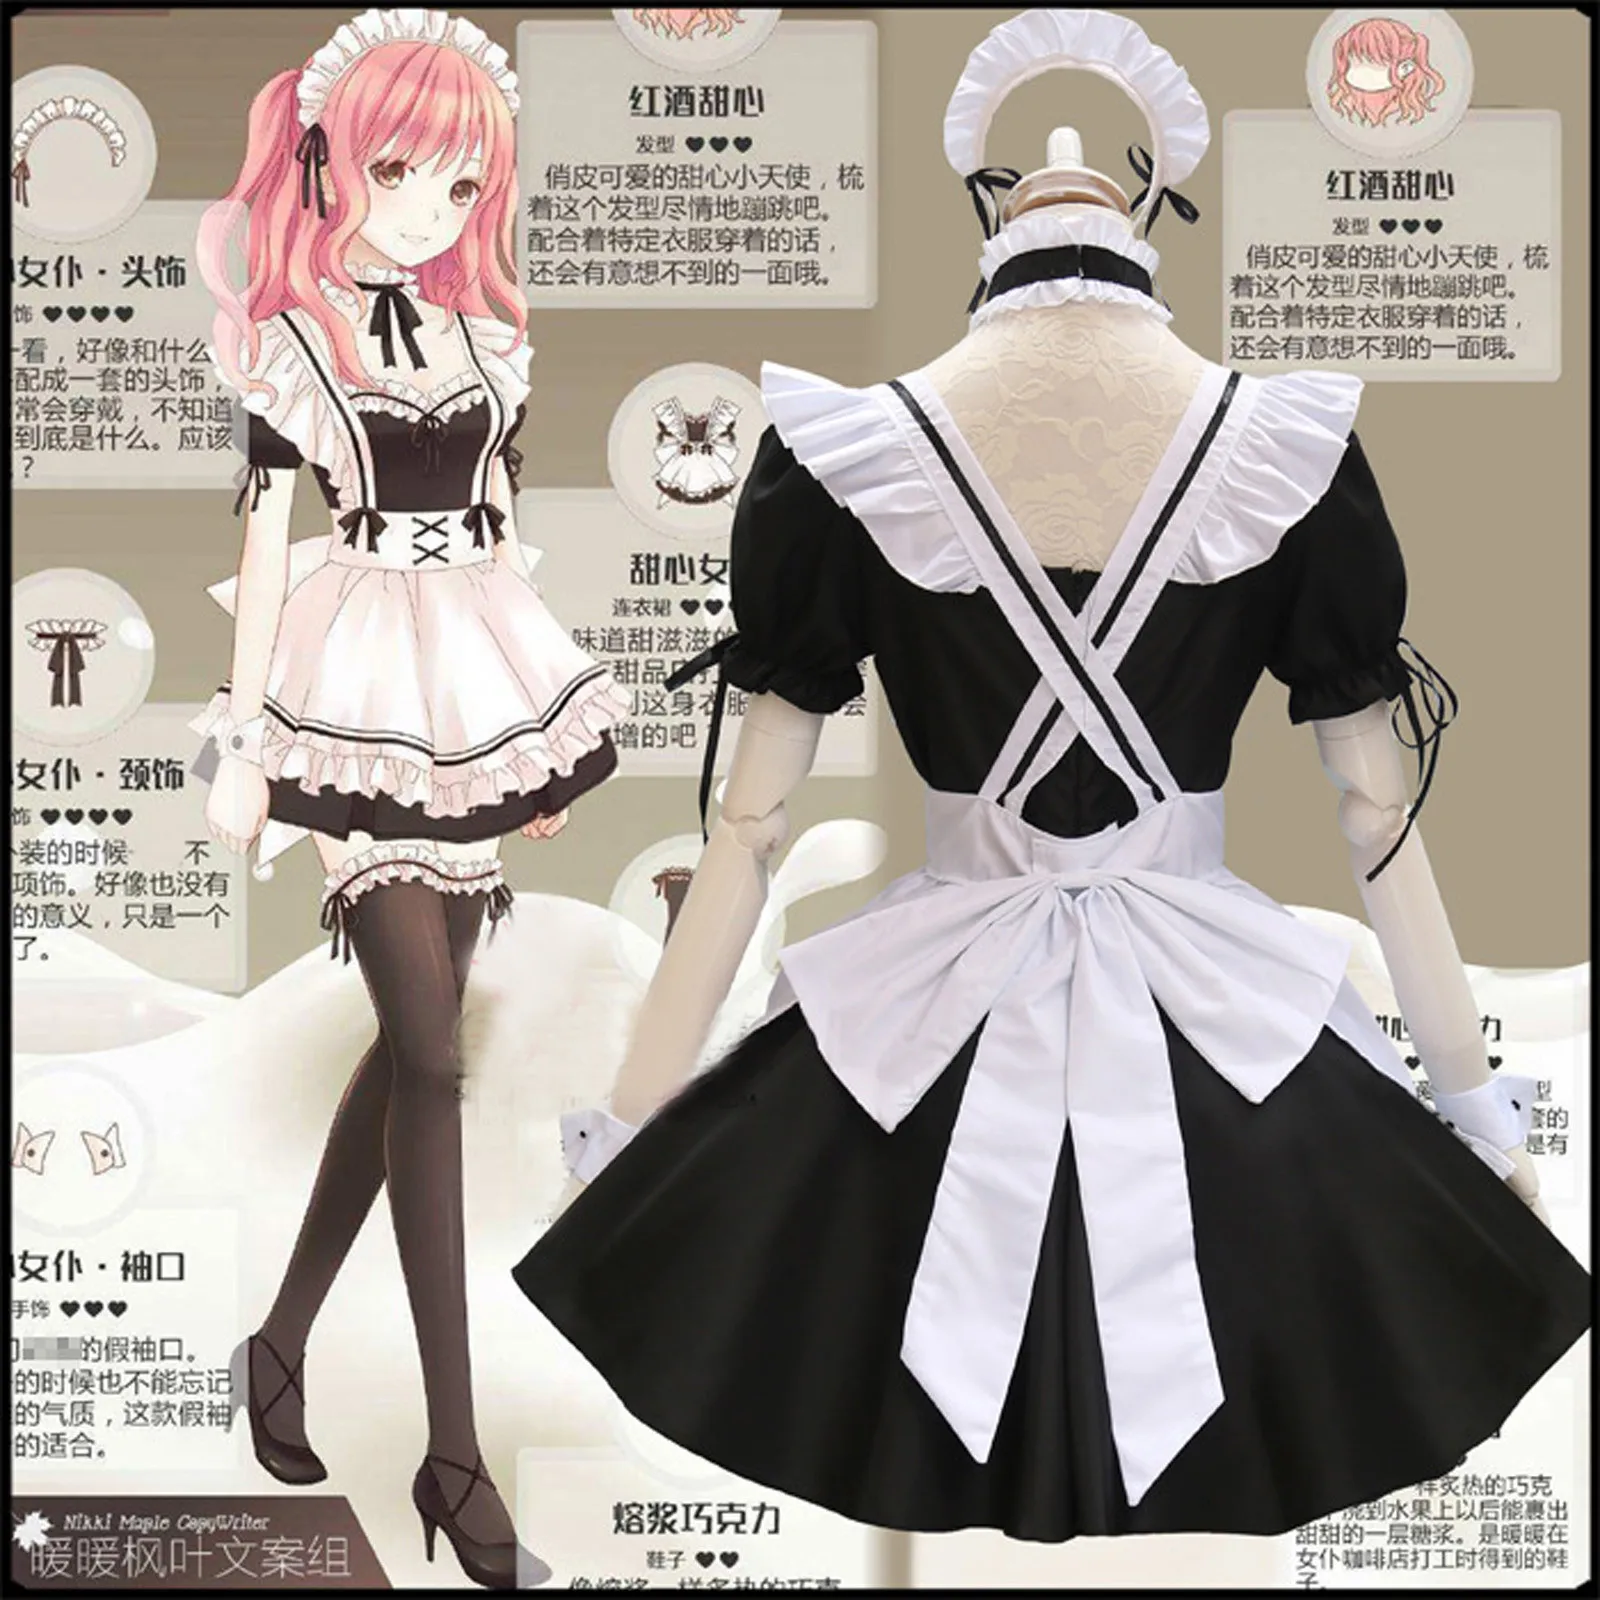 pirate costume women Women Lovely Maid Cosplay Costume Short Sleeve Retro Maid Lolita Dress Cute Japanese French Outfit Cosplay Costume Plus Size 3XL halloween outfits